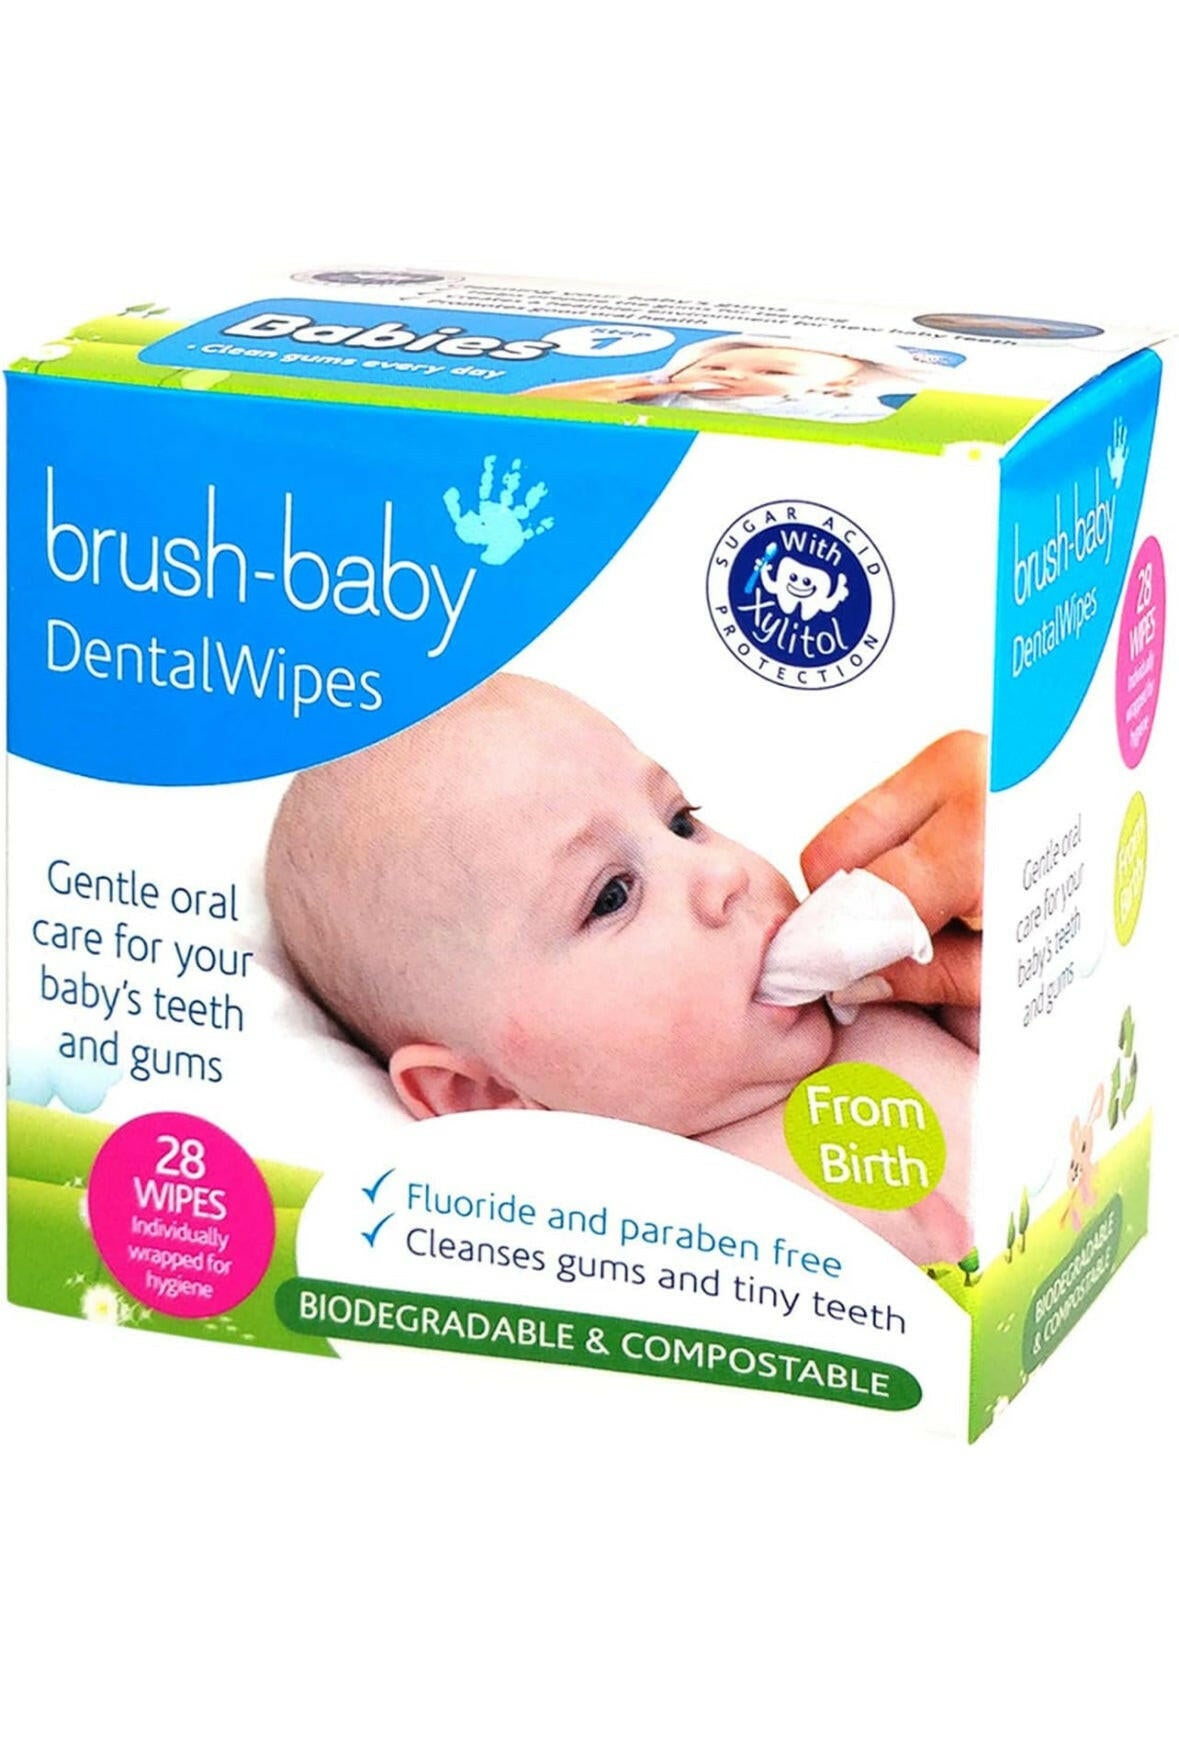 Brush-baby Dental Wipes Biodegradable  28 wipes